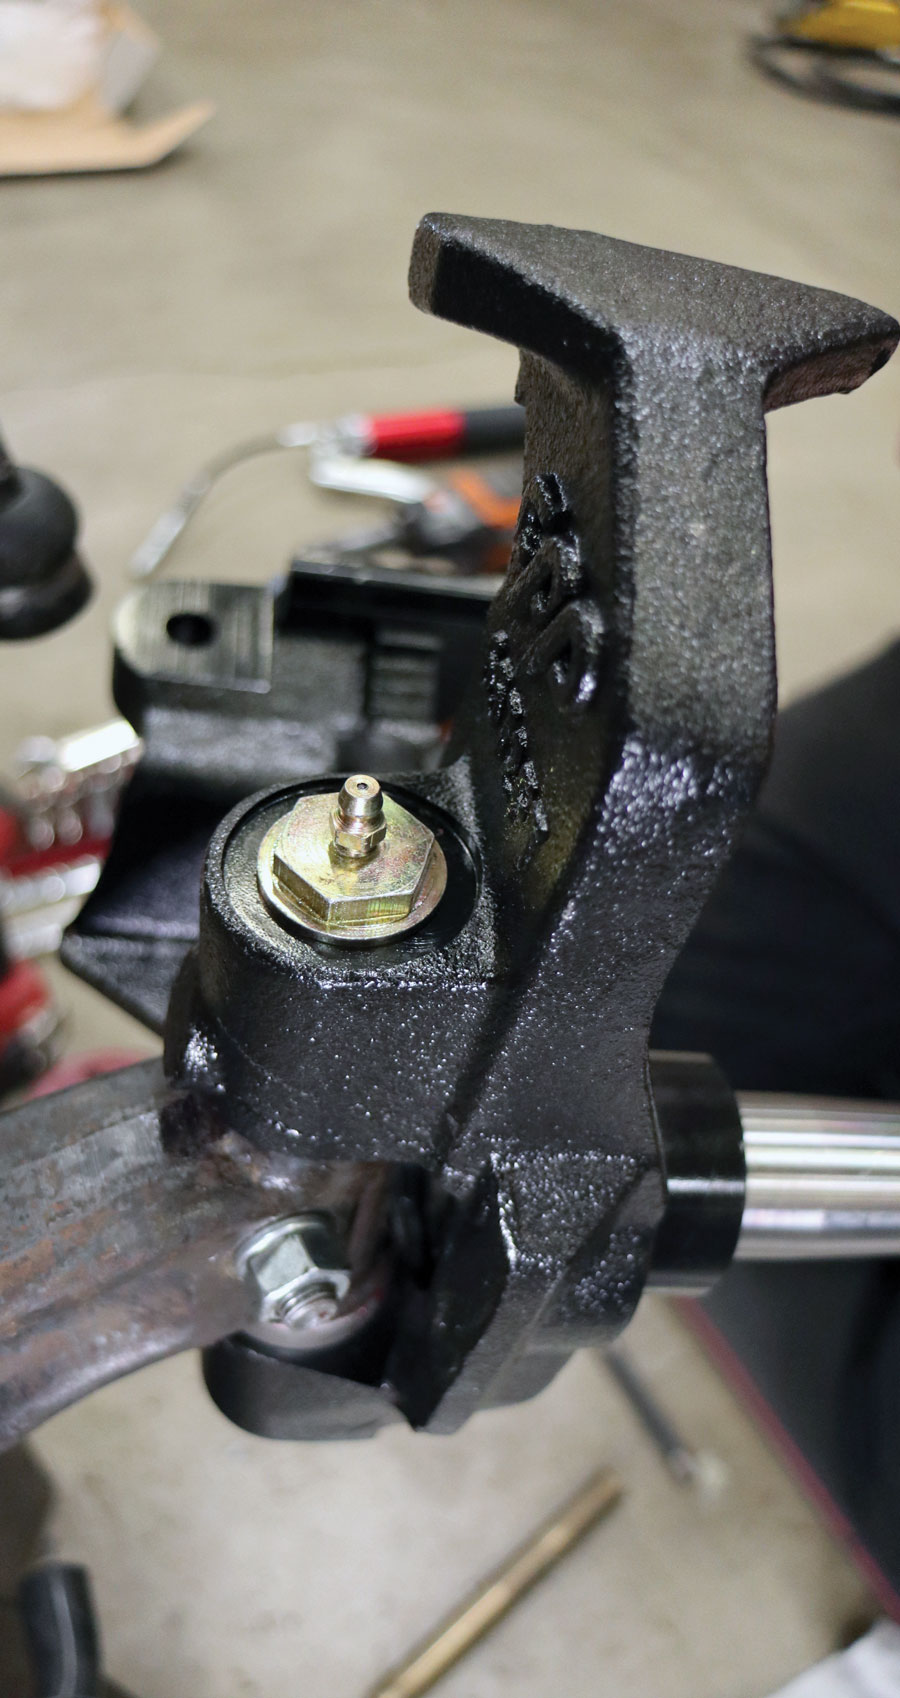 Finish off the spindle by installing the new seal and nut